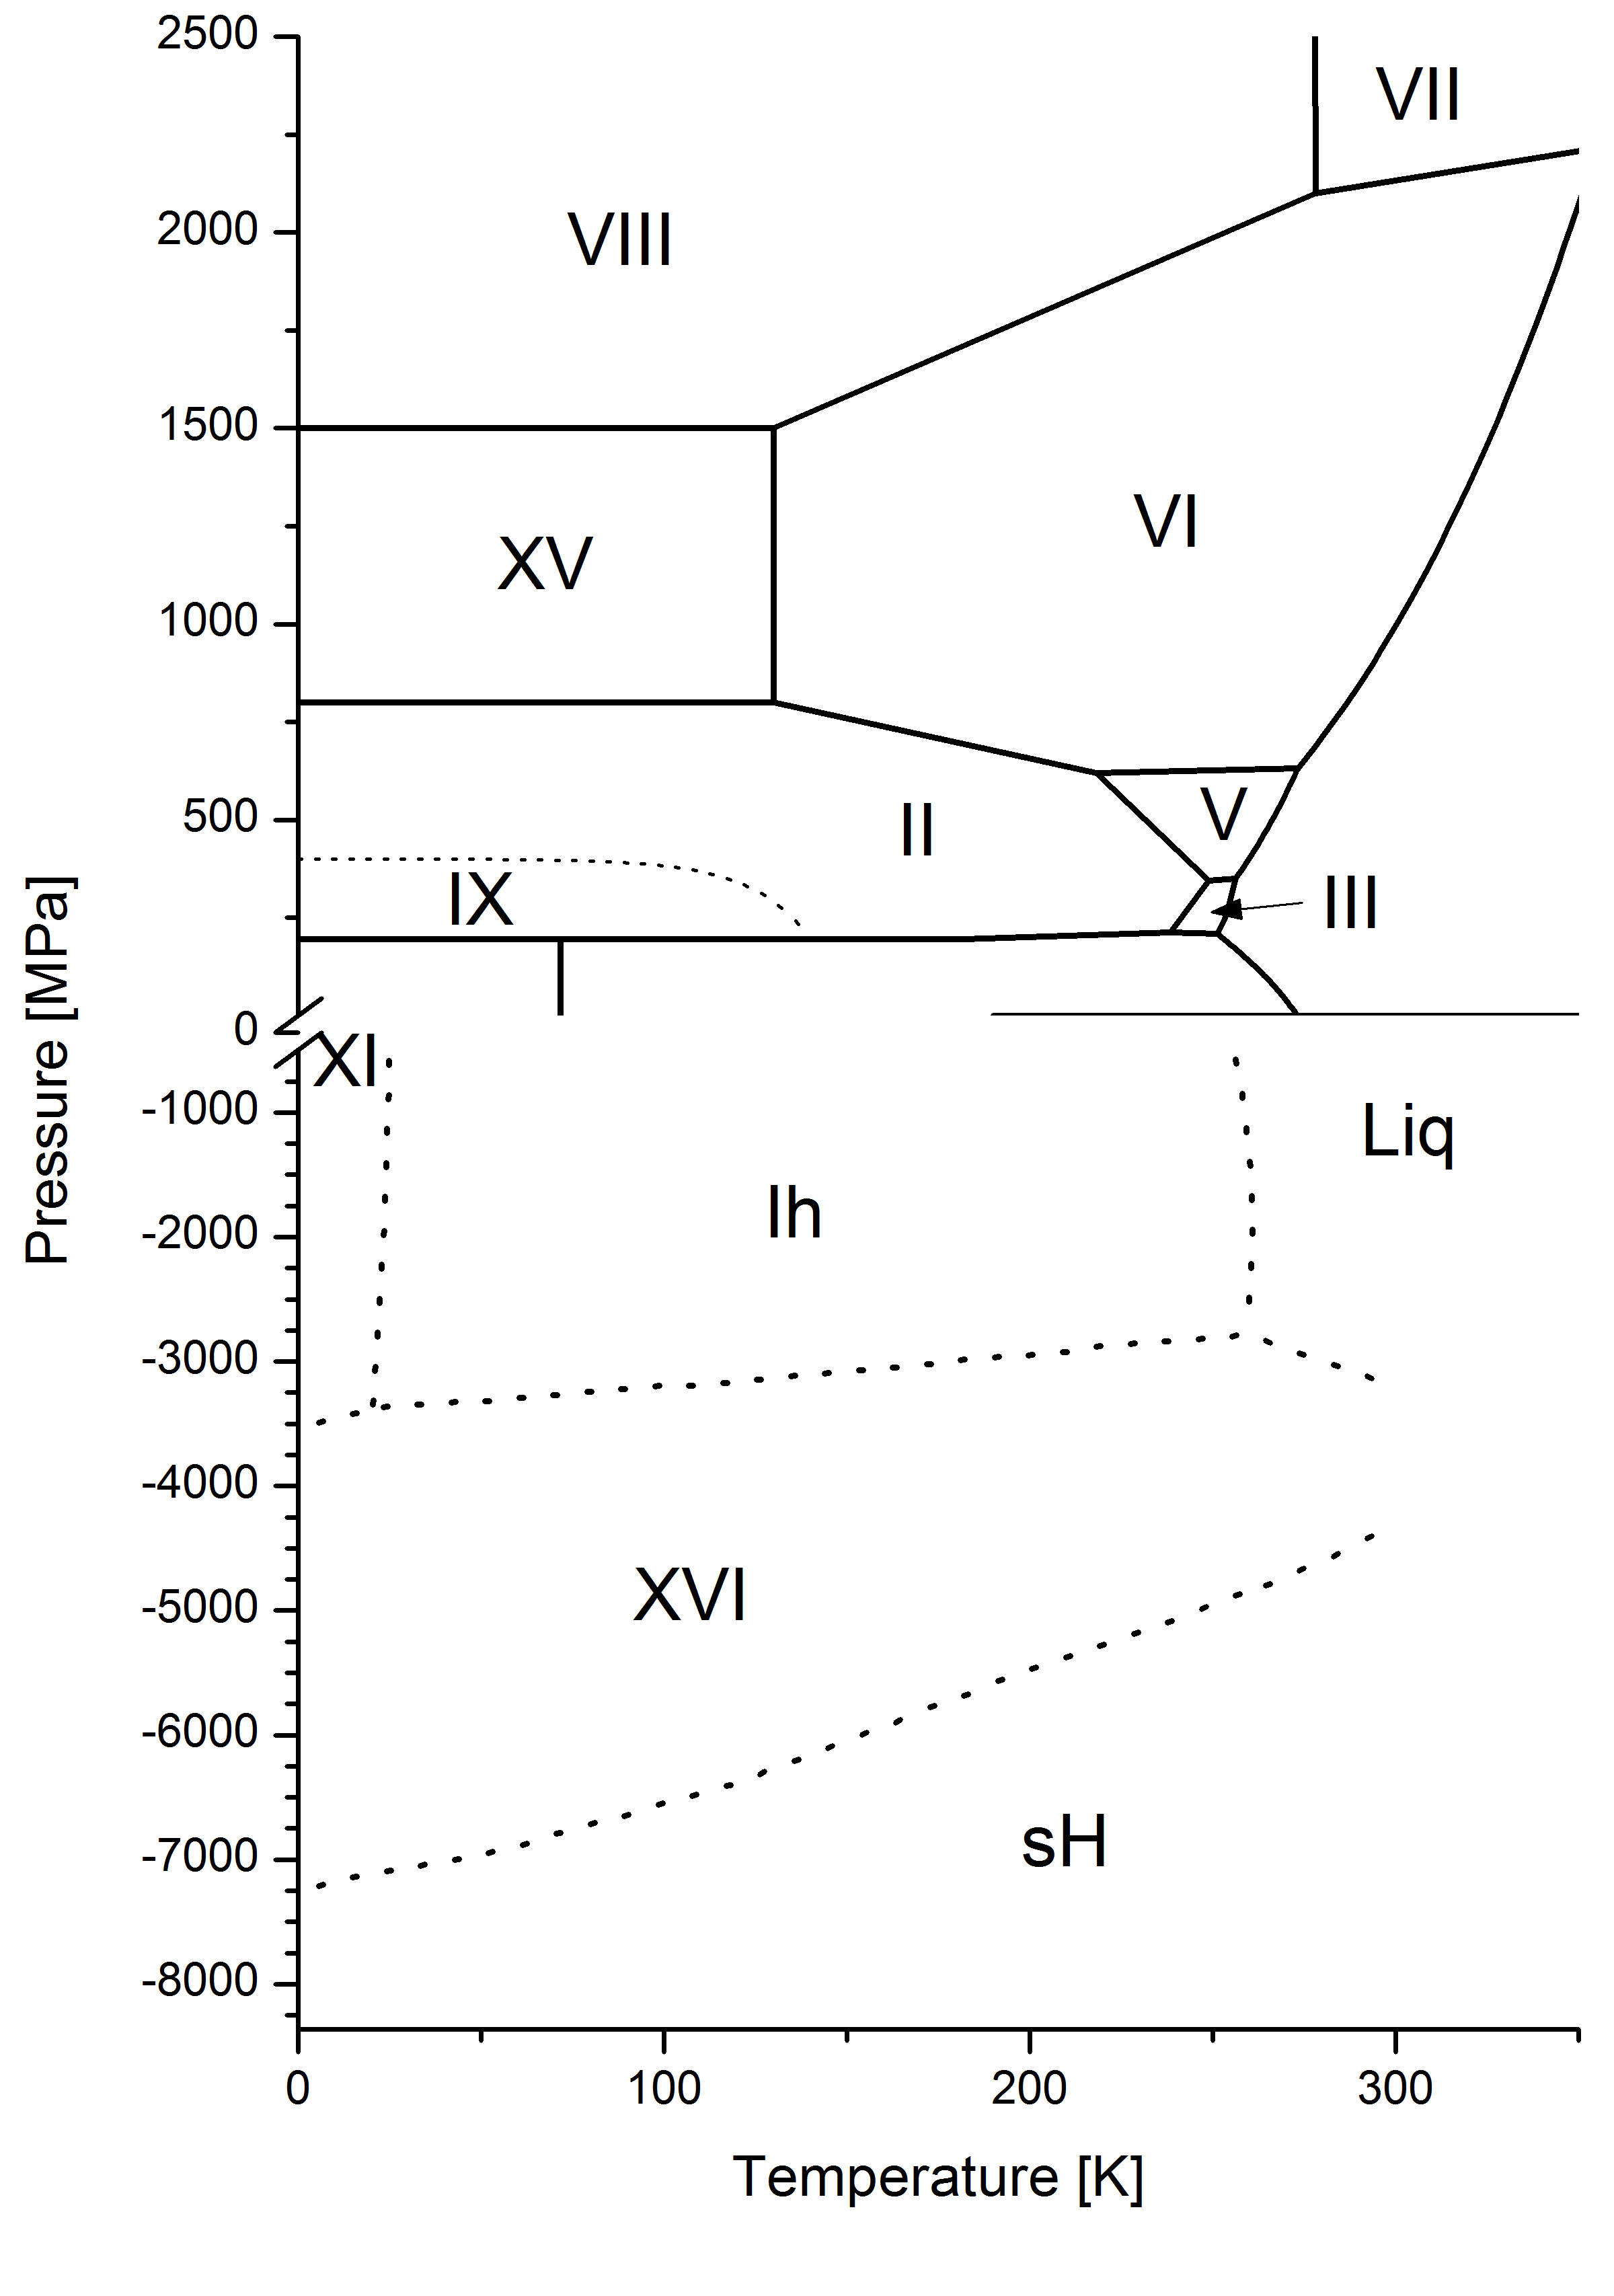 Water Phase Diagram Filewater Phase Diagram Extended To Negative Pressurs